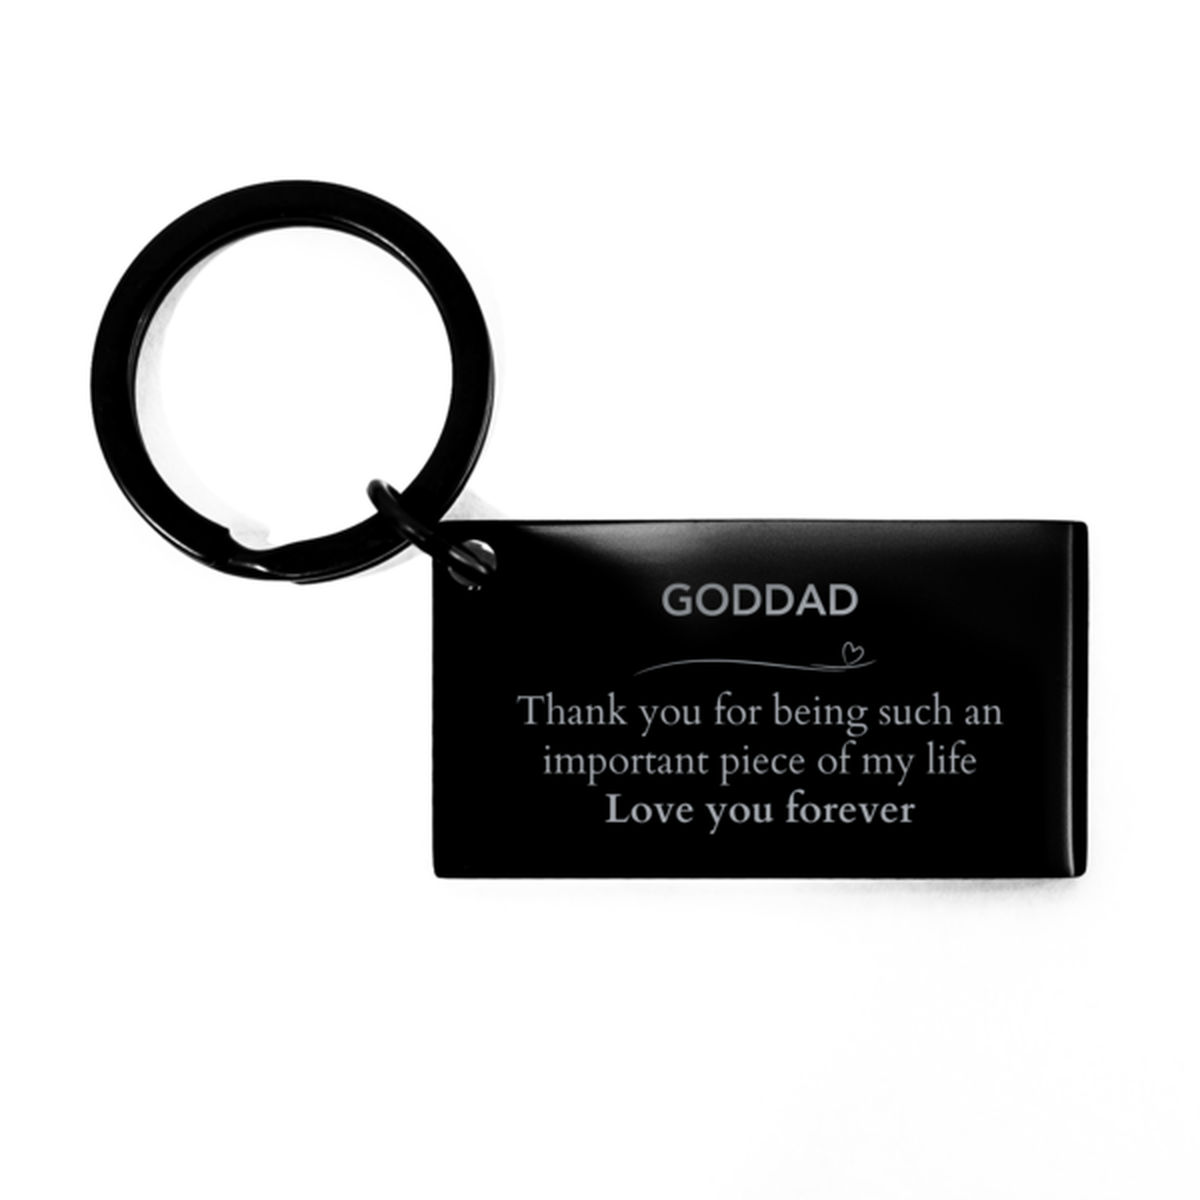 Appropriate Goddad Keychain Epic Birthday Gifts for Goddad Thank you for being such an important piece of my life Goddad Christmas Mothers Fathers Day